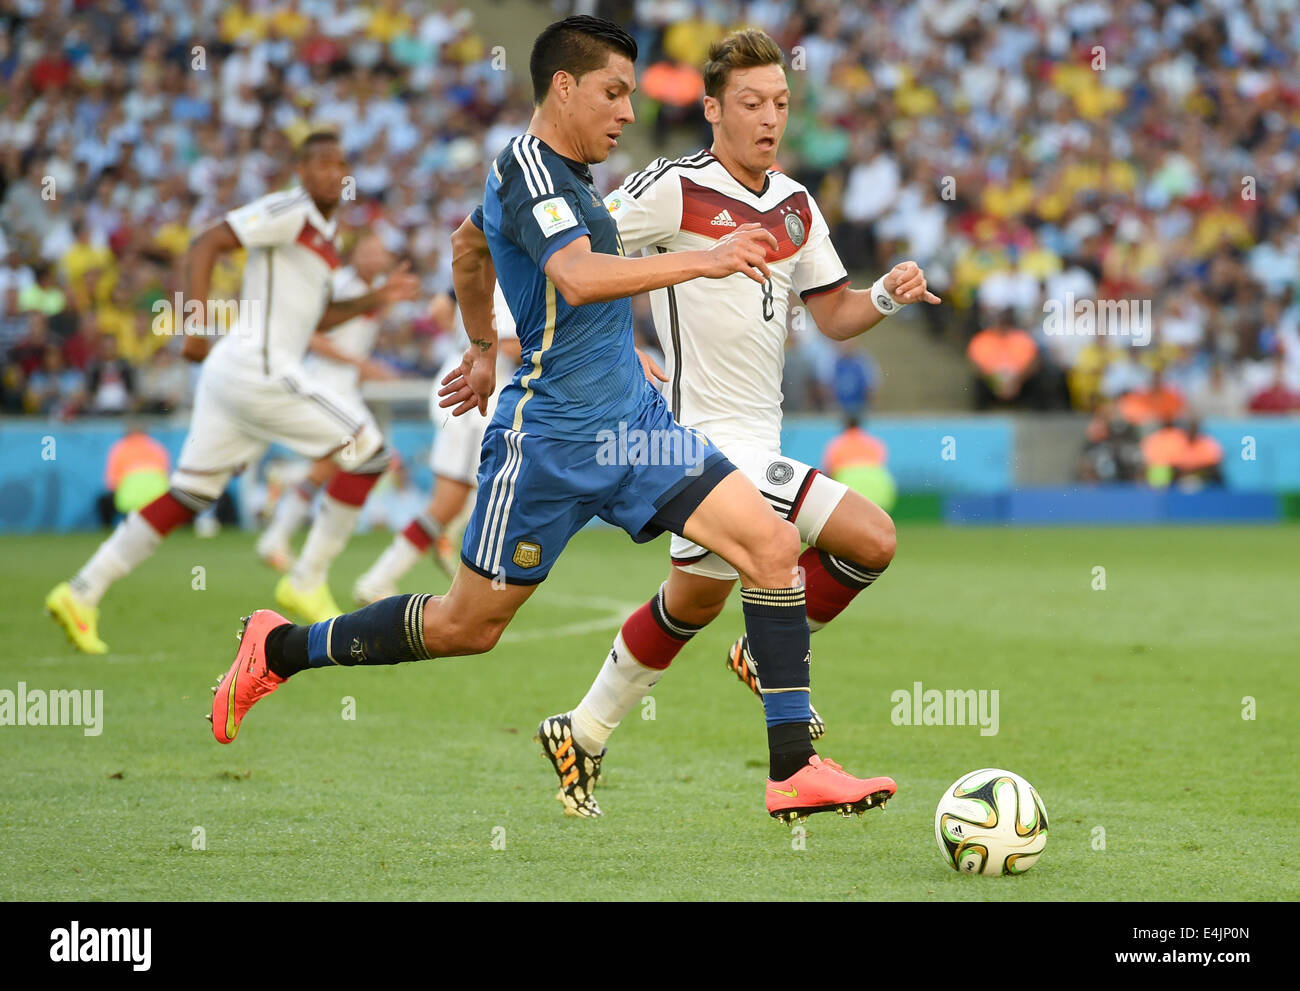 Rio de Janeiro, Brazil. 13th July, 2014. Mesut Oezil of Germany (R) and Enzo Perez of Argenina vie for the ball during the FIFA World Cup 2014 final soccer match between Germany and Argentina at the Estadio do Maracana in Rio de Janeiro, Brazil, 13 July 2014. Photo: Marcus Brandt/dpa/Alamy Live News Stock Photo